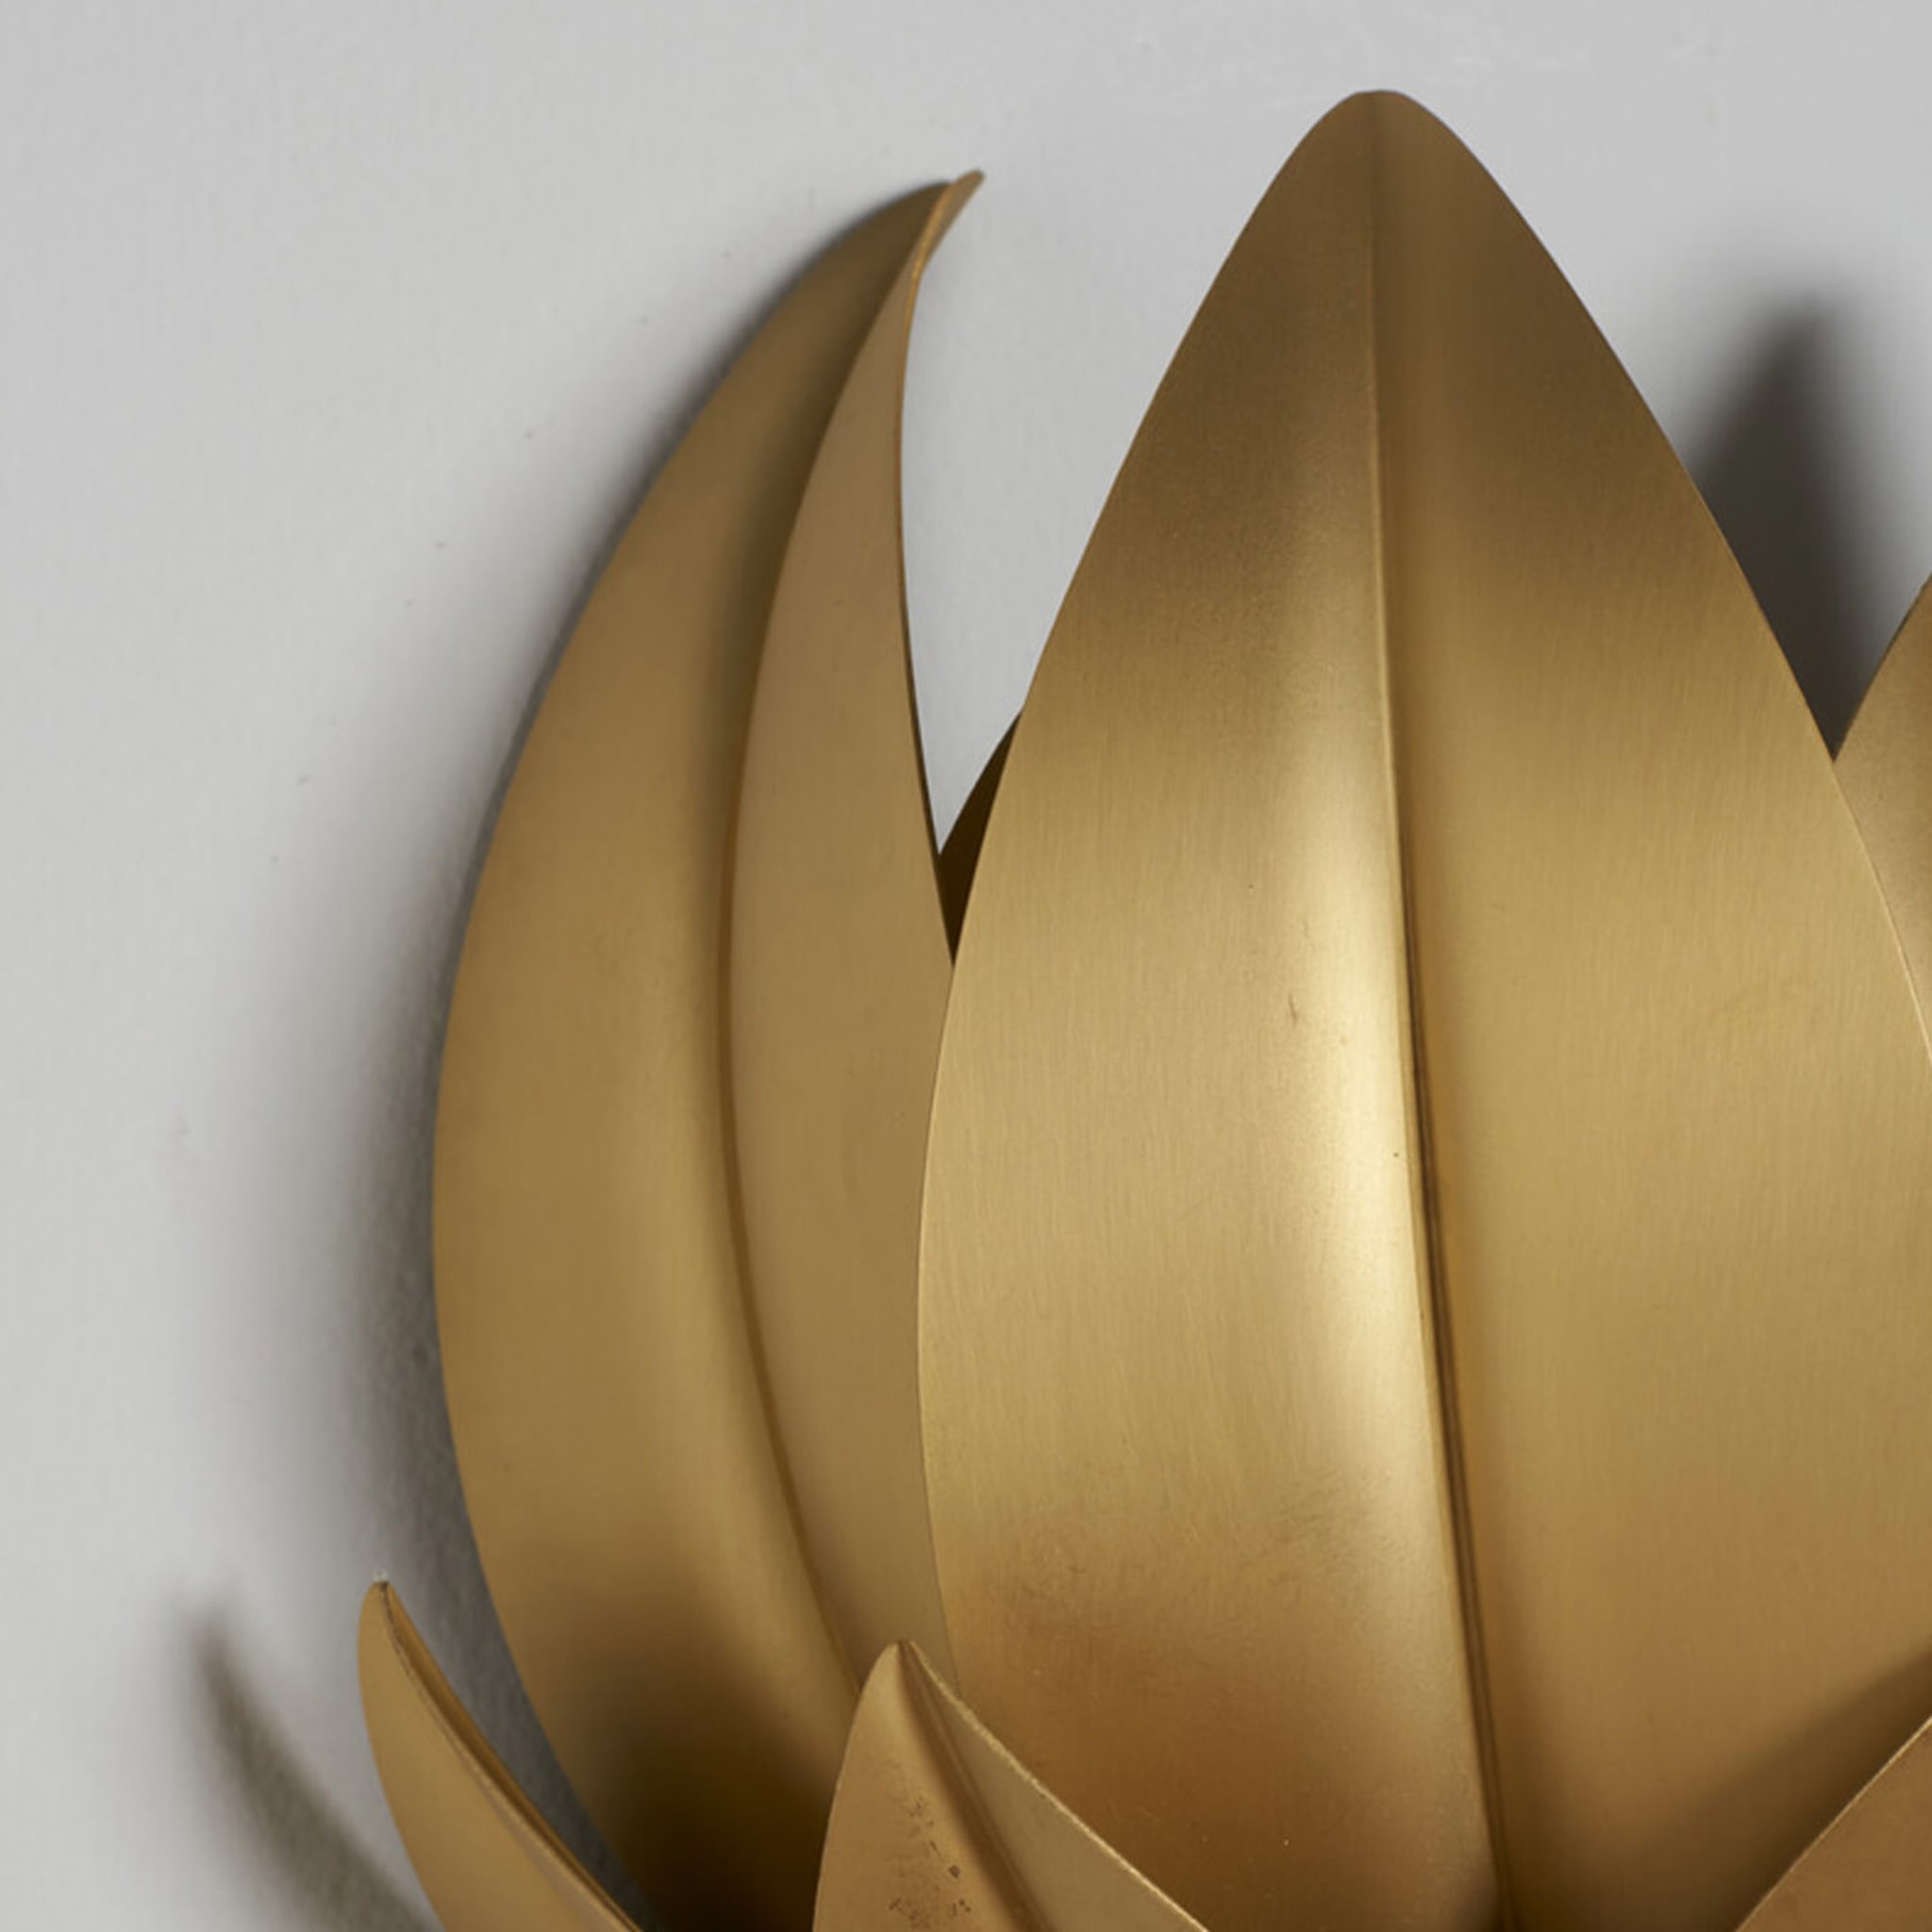 "Leaves" Wall Sconce in Satin Brass by Droulers Architecture - Alternative view 1